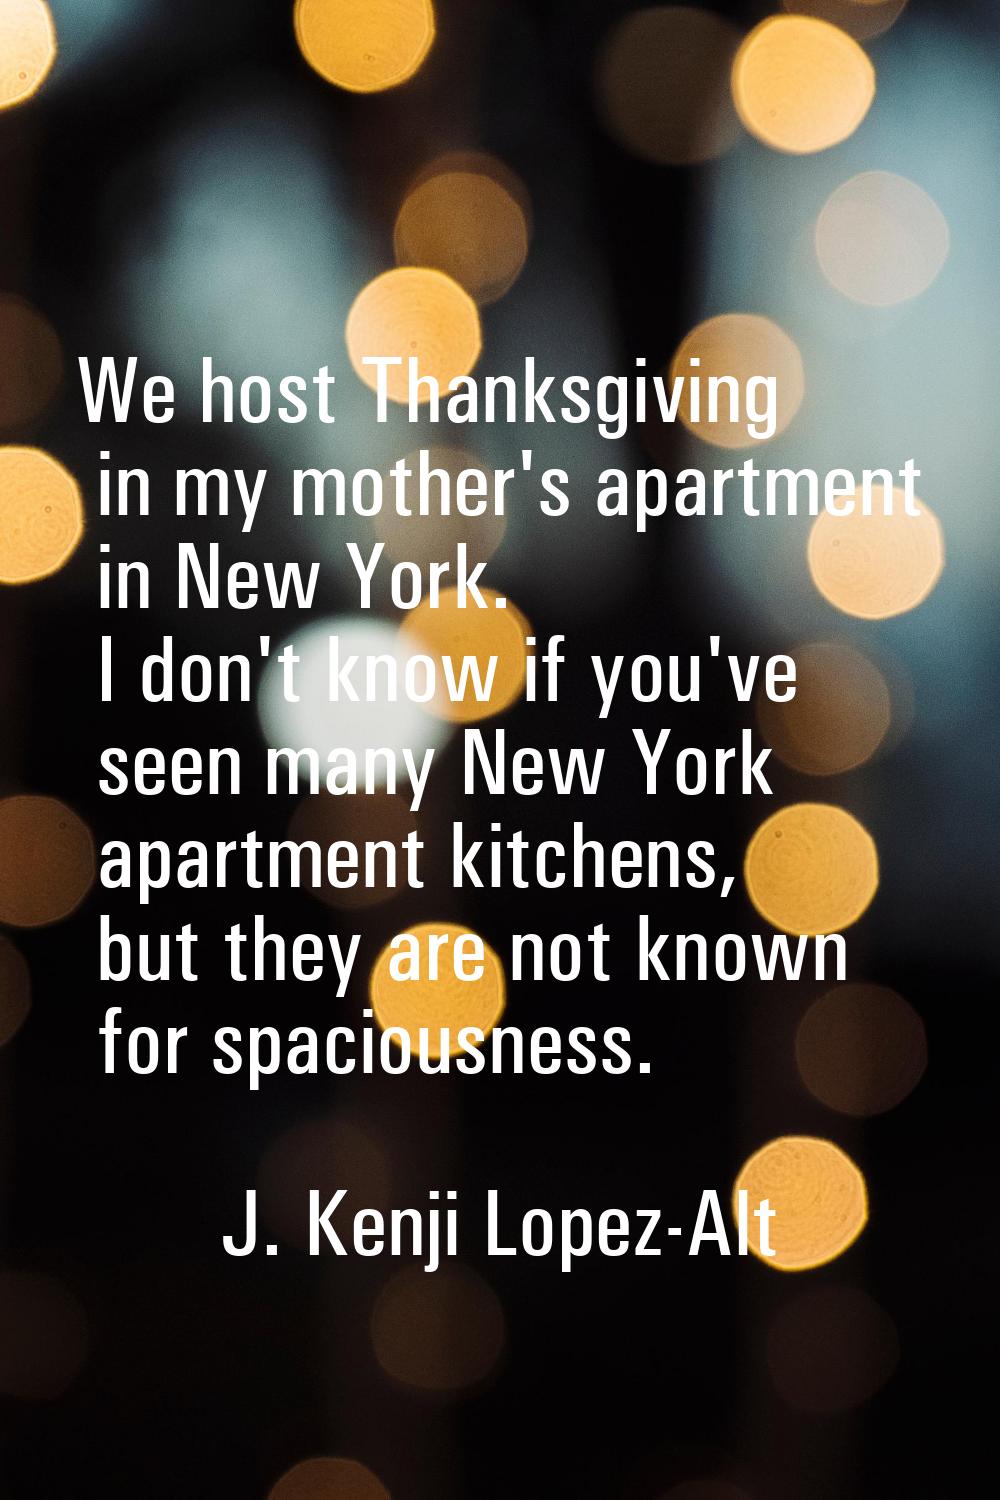 We host Thanksgiving in my mother's apartment in New York. I don't know if you've seen many New Yor